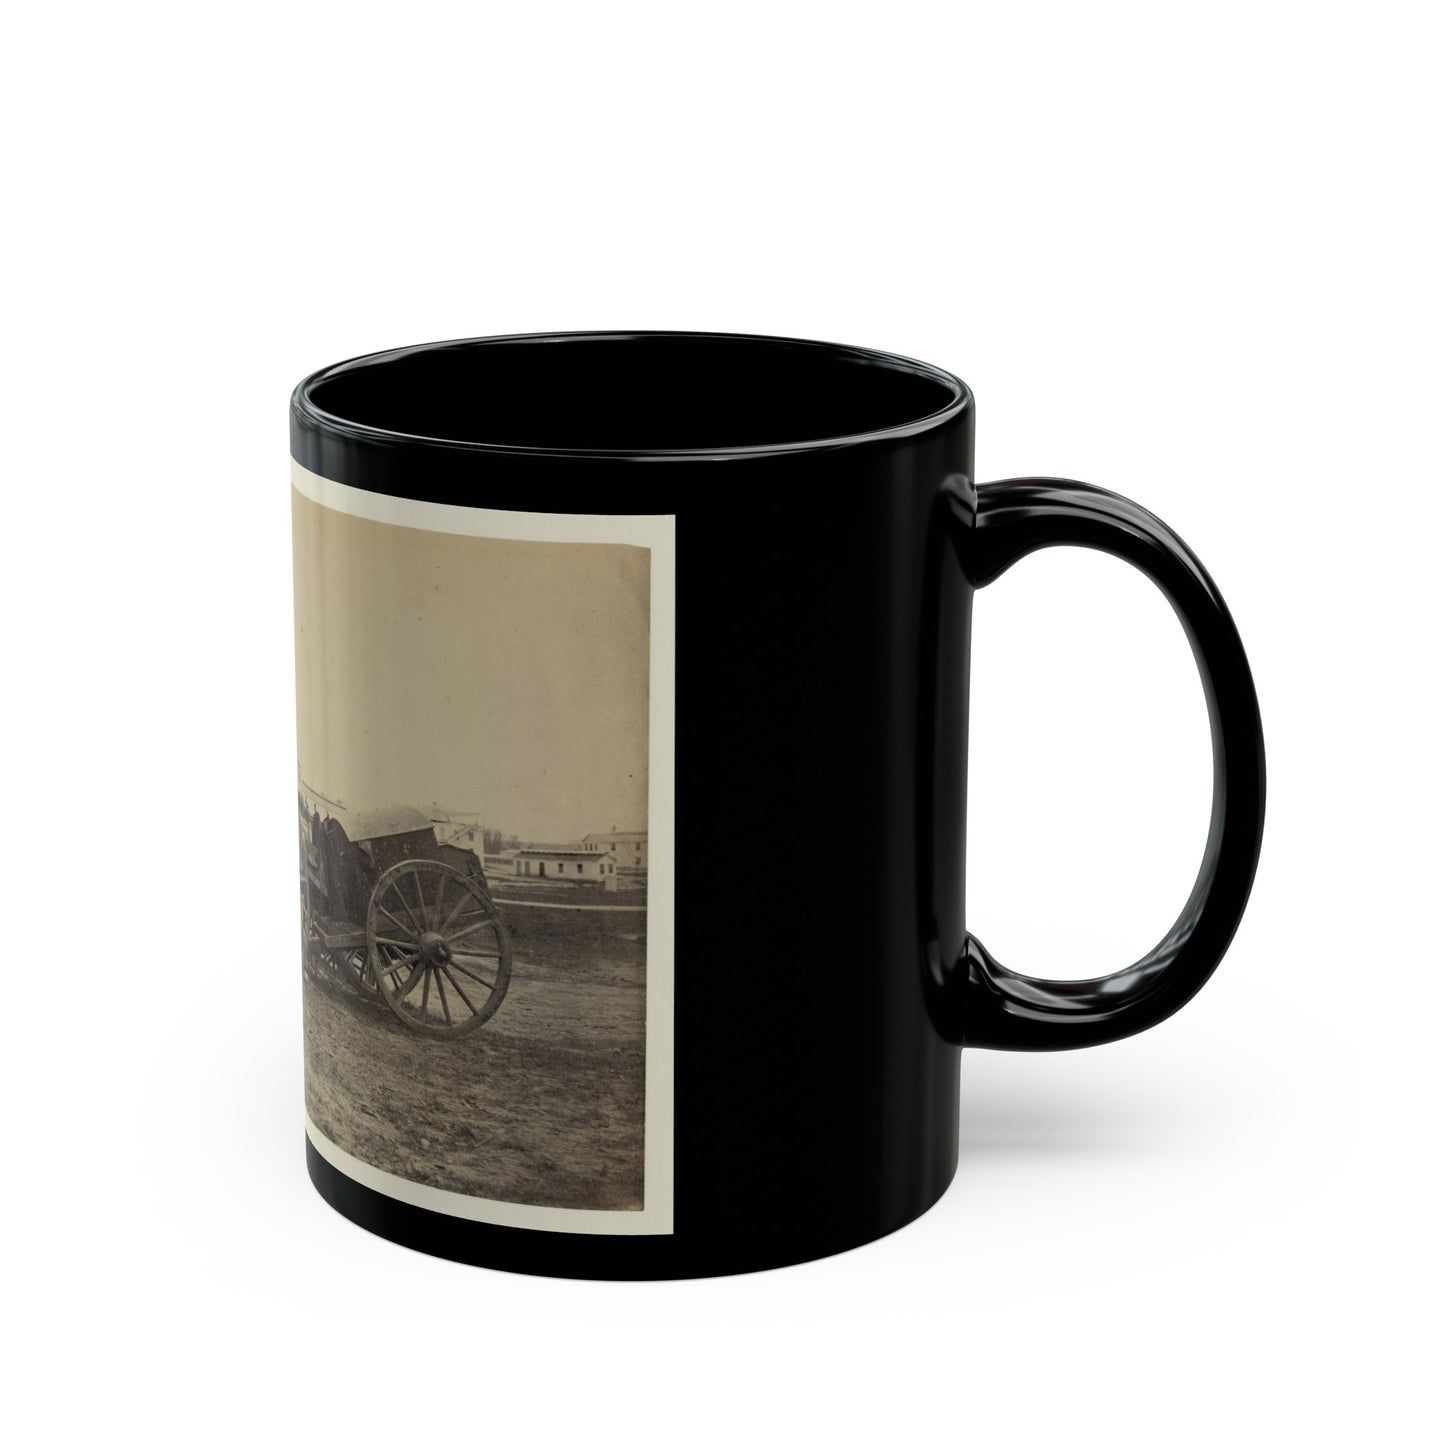 Wagons With Caisson In Foreground, Probably At A Civil War Military Camp (U.S. Civil War) Black Coffee Mug